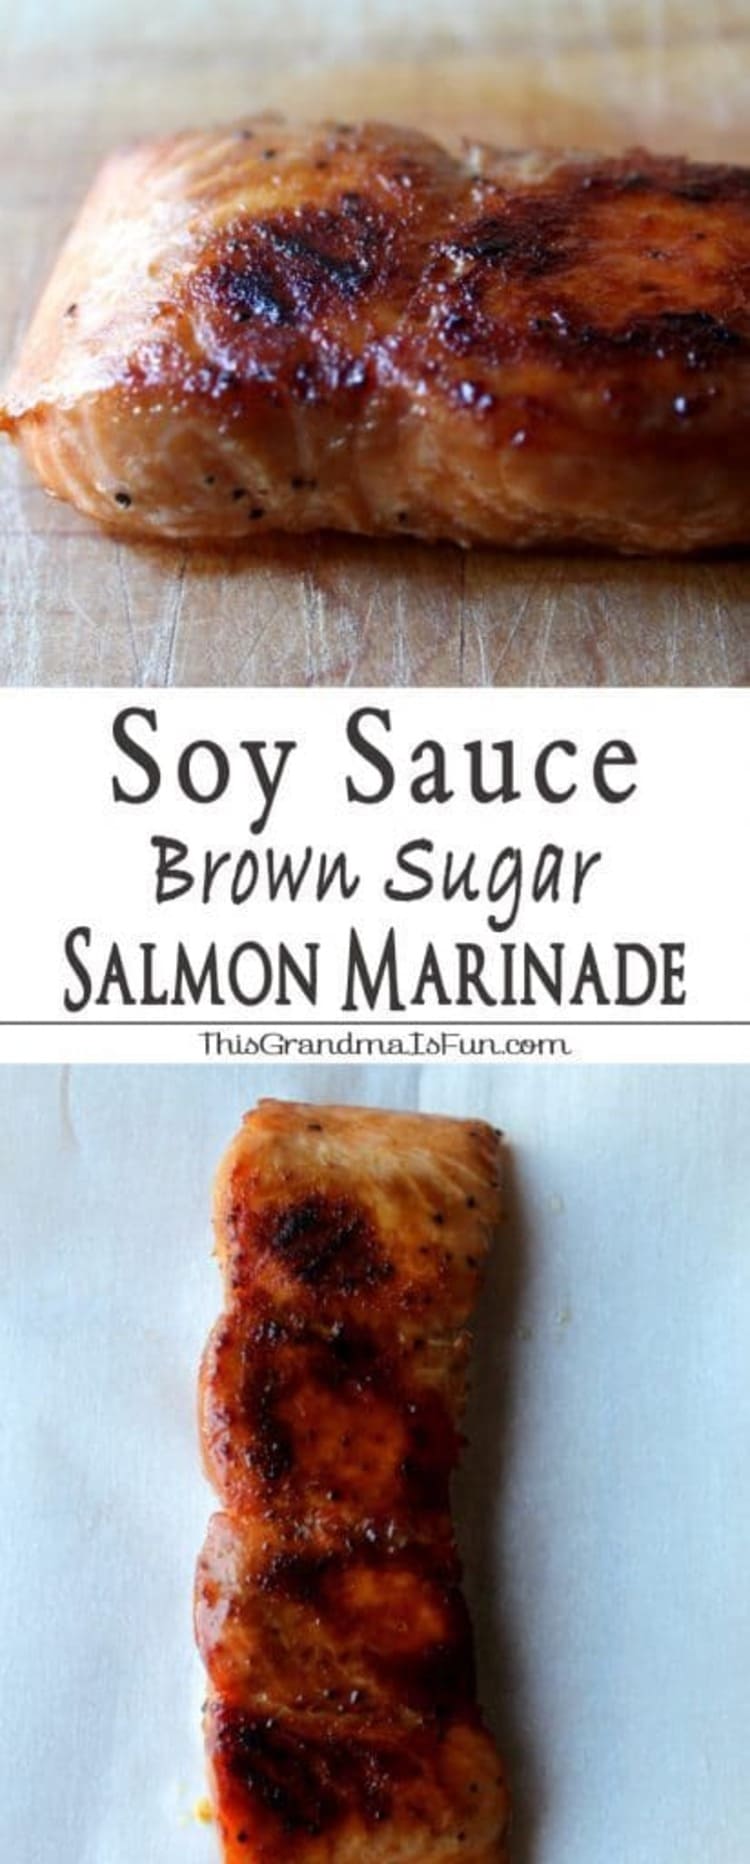 Soy Sauce Brown Sugar Marinade Even Salmon haters will love salmon with this Soy Sauce Brown Sugar Marinade .This Soy Sauce and Brown Sugar Salmon Marinade is not only an easy weeknight meal, but elegant enough to impress guests. Carmelized, healthy, and delicious! Once marinaded, the salmon is baked. A beautiful caramelized crust forms leaving the Salmon tender, moist and full of flavor. This is the easiest way to prepare and cook salmon. It is simple and it's presentation is elegant. Give it a try!